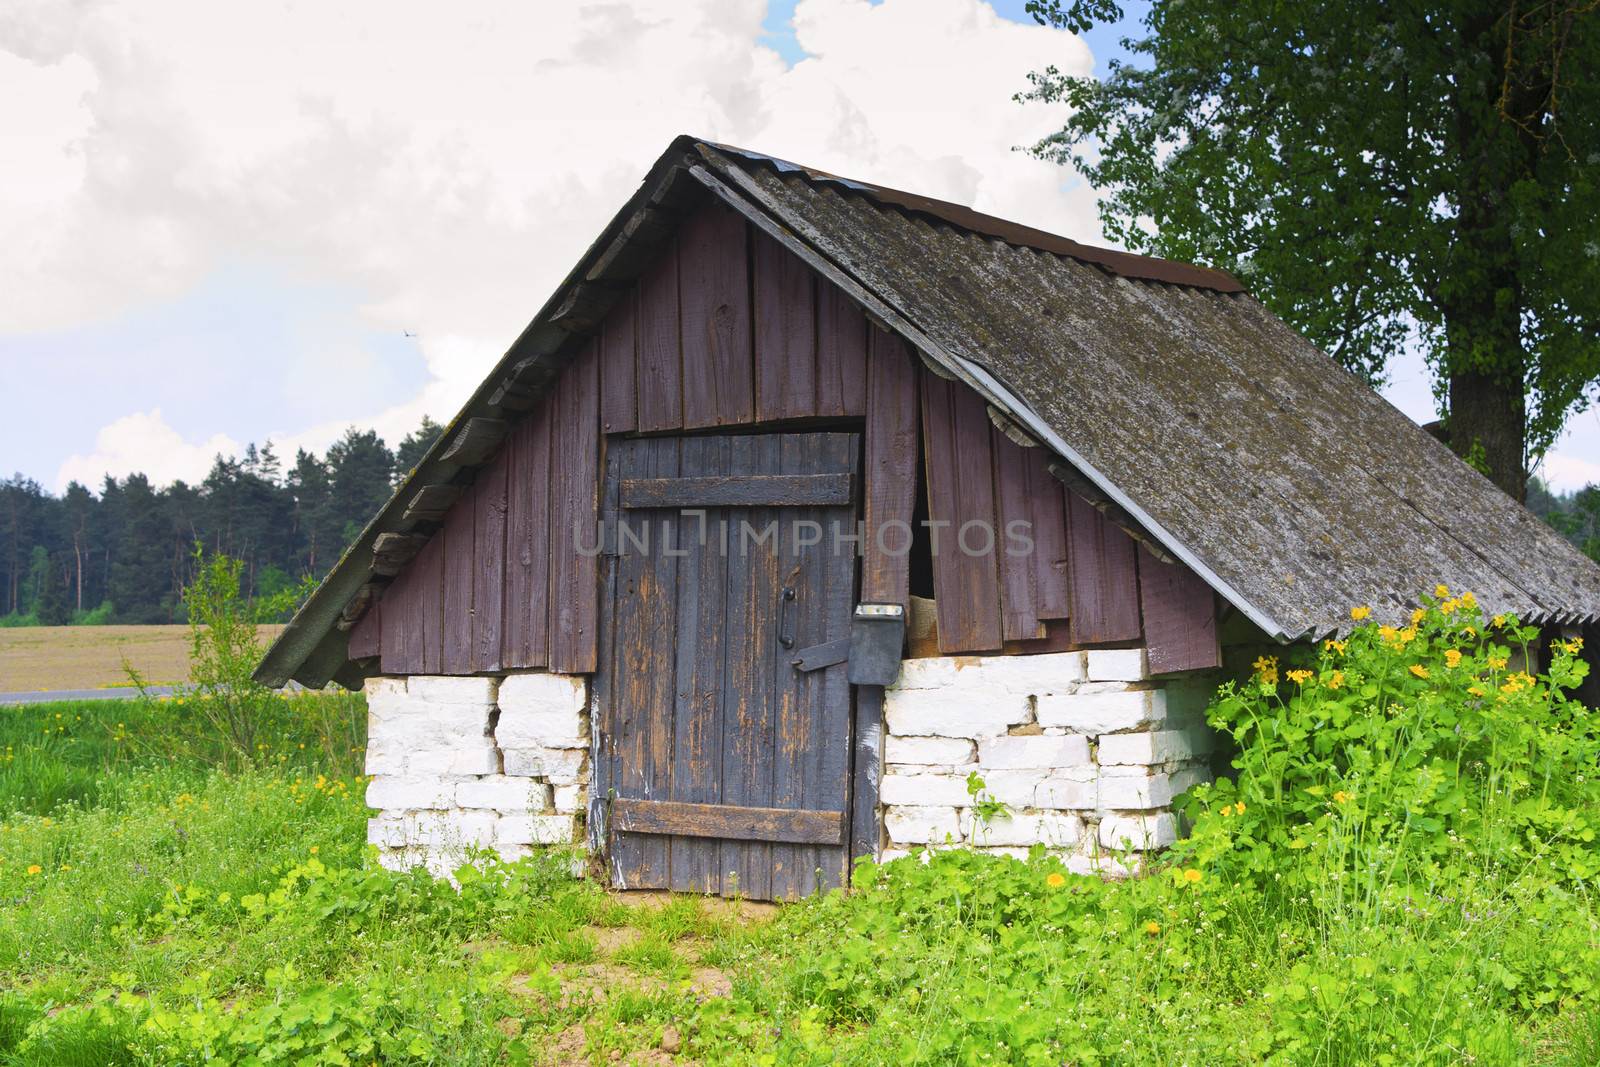 Non-residential rustic barn in the woods horisontal